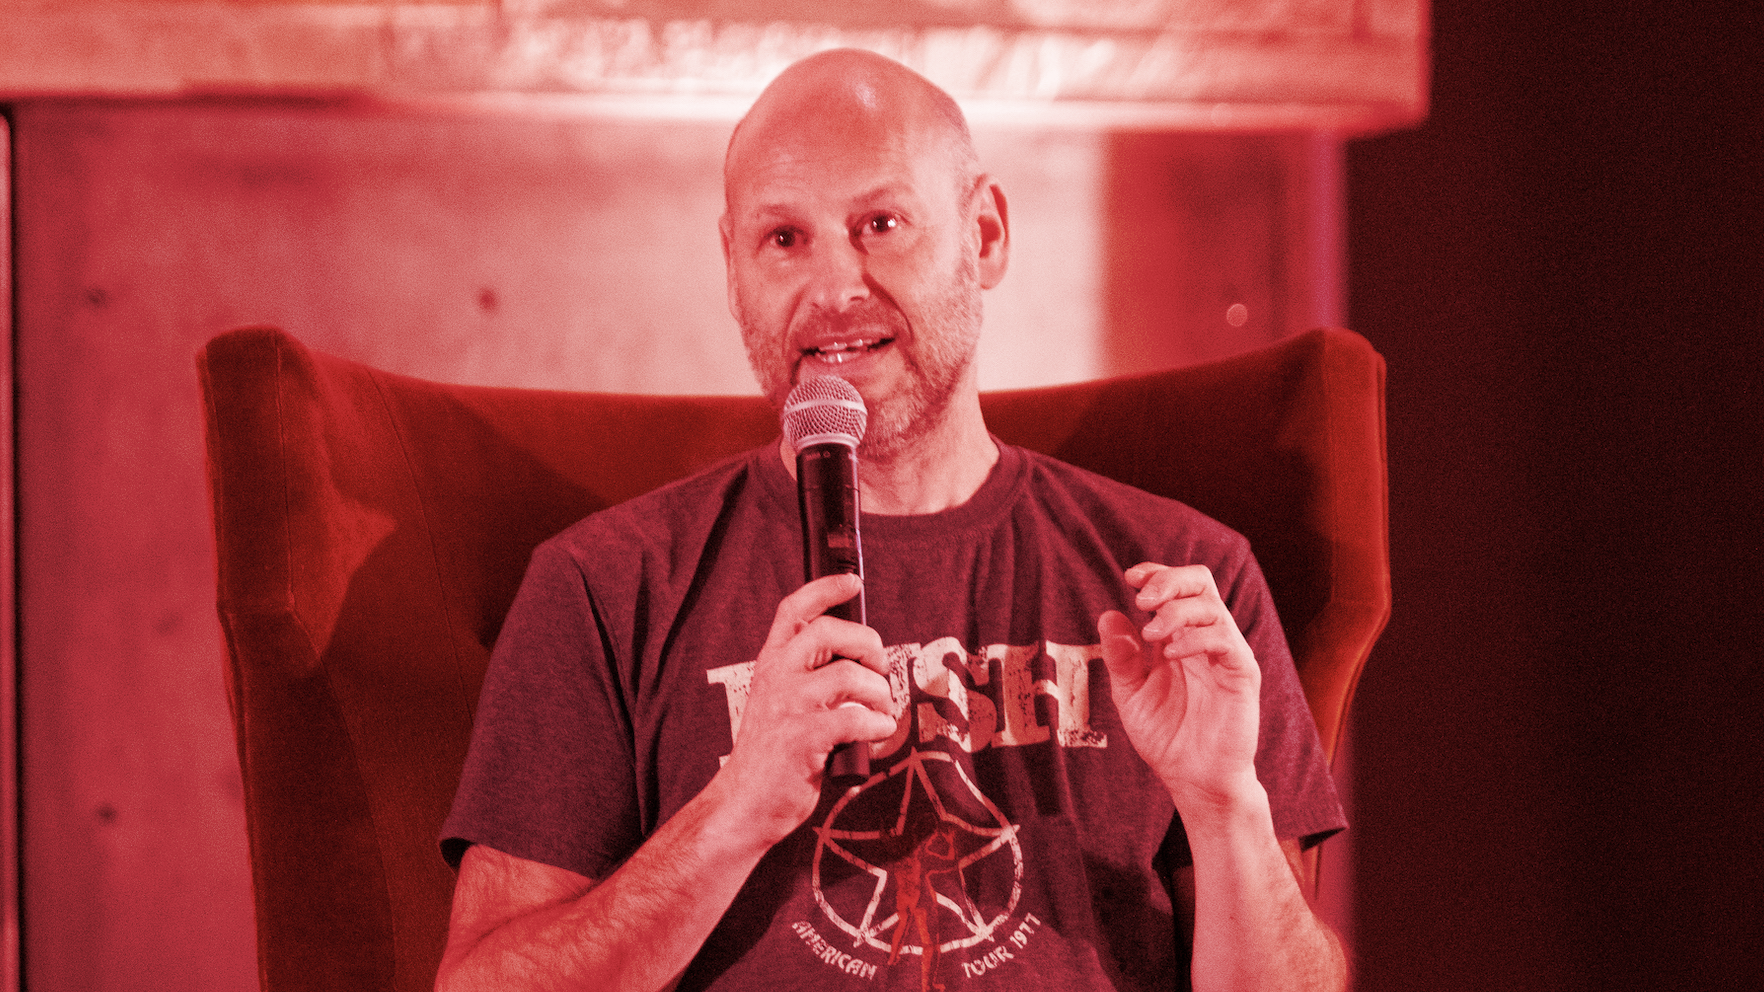 Crypto Market Is ‘The Tail Being Wagged by a Very Sick Dog’: Ethereum Co-Founder Joe Lubin